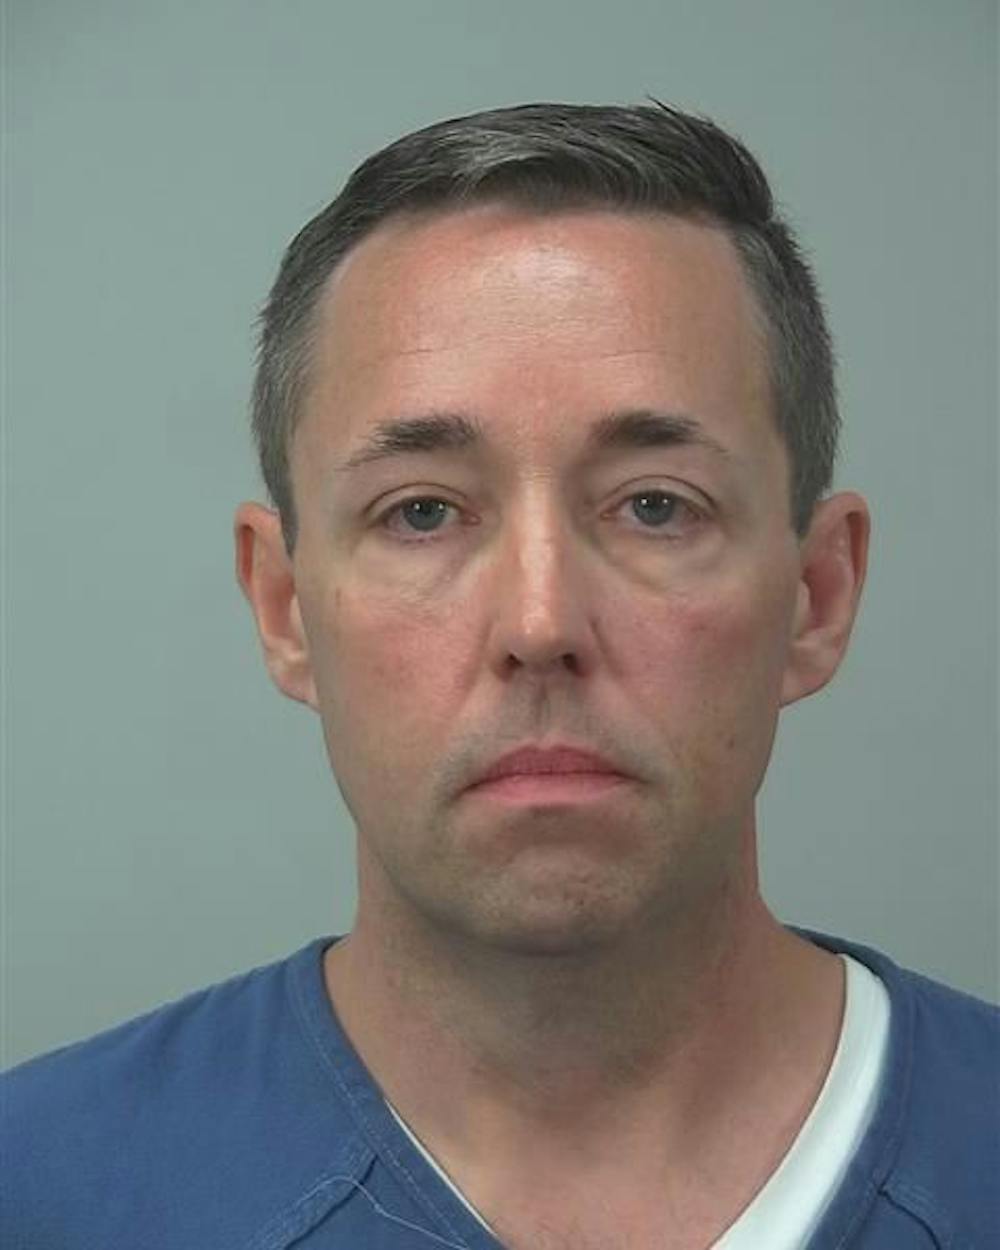 Terry D. Fay, a 50-year-old Madison resident, was arrested for sexual assault of a minor Friday.